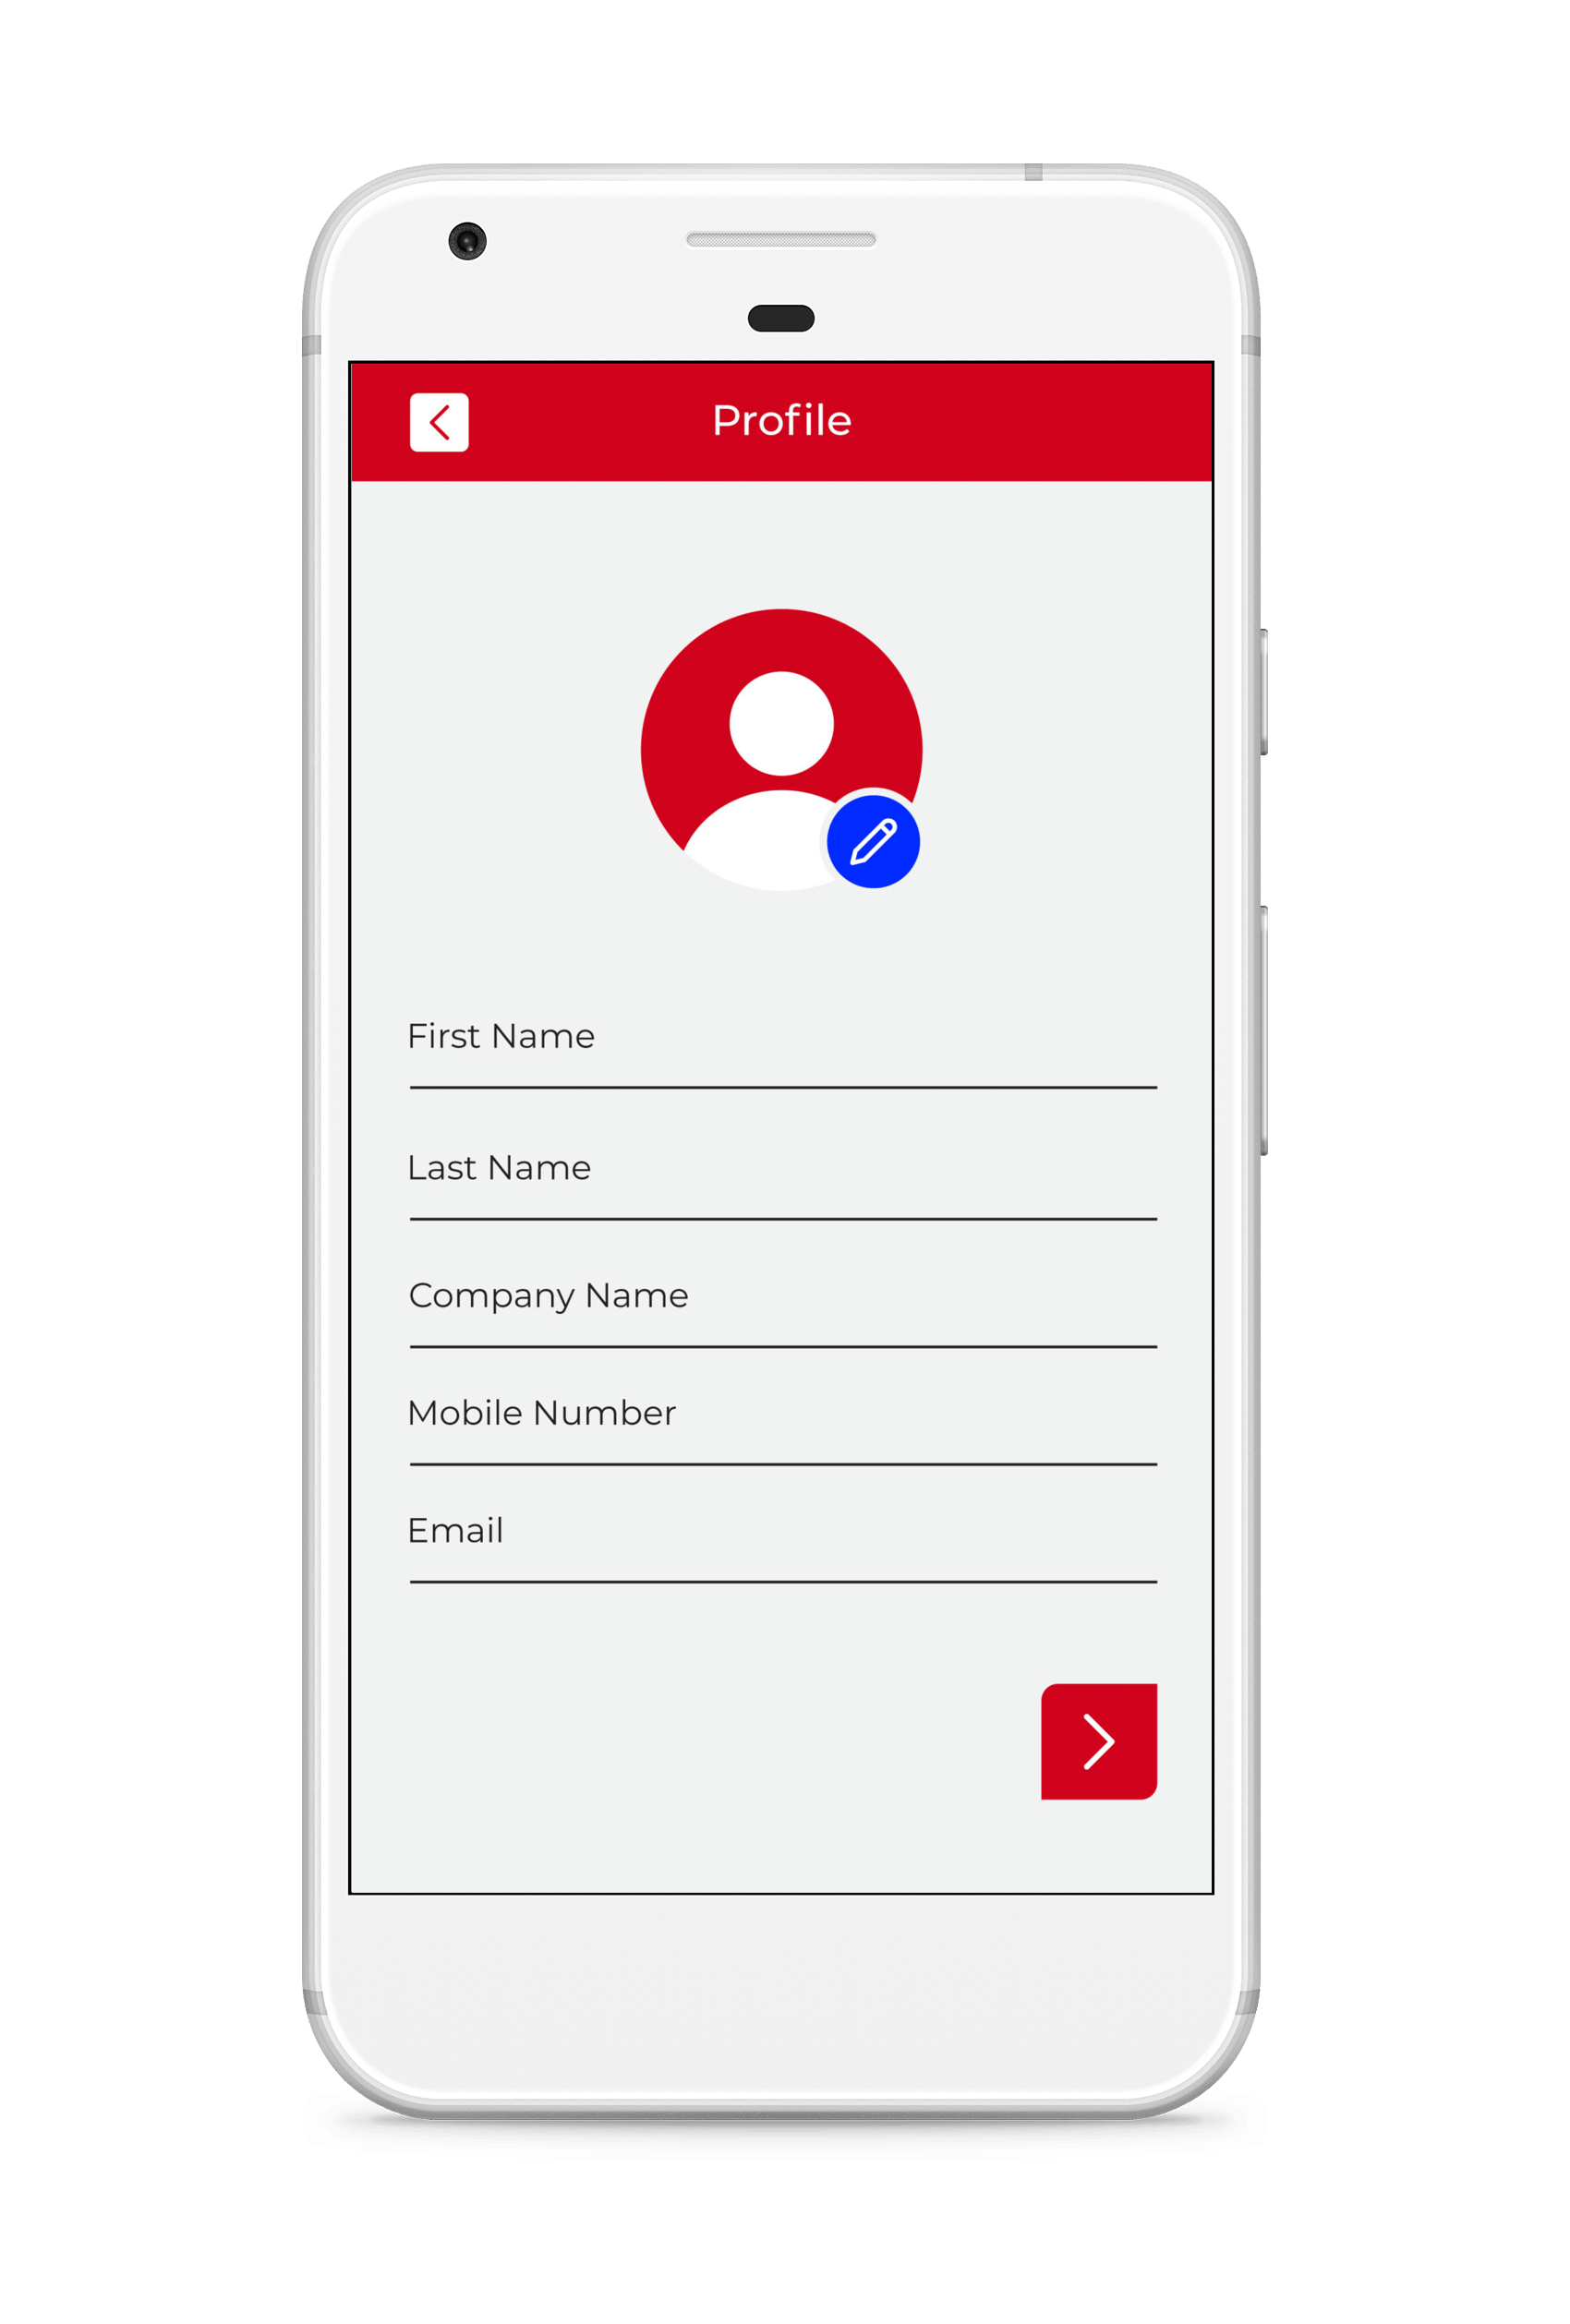 Manage your second phone number profile